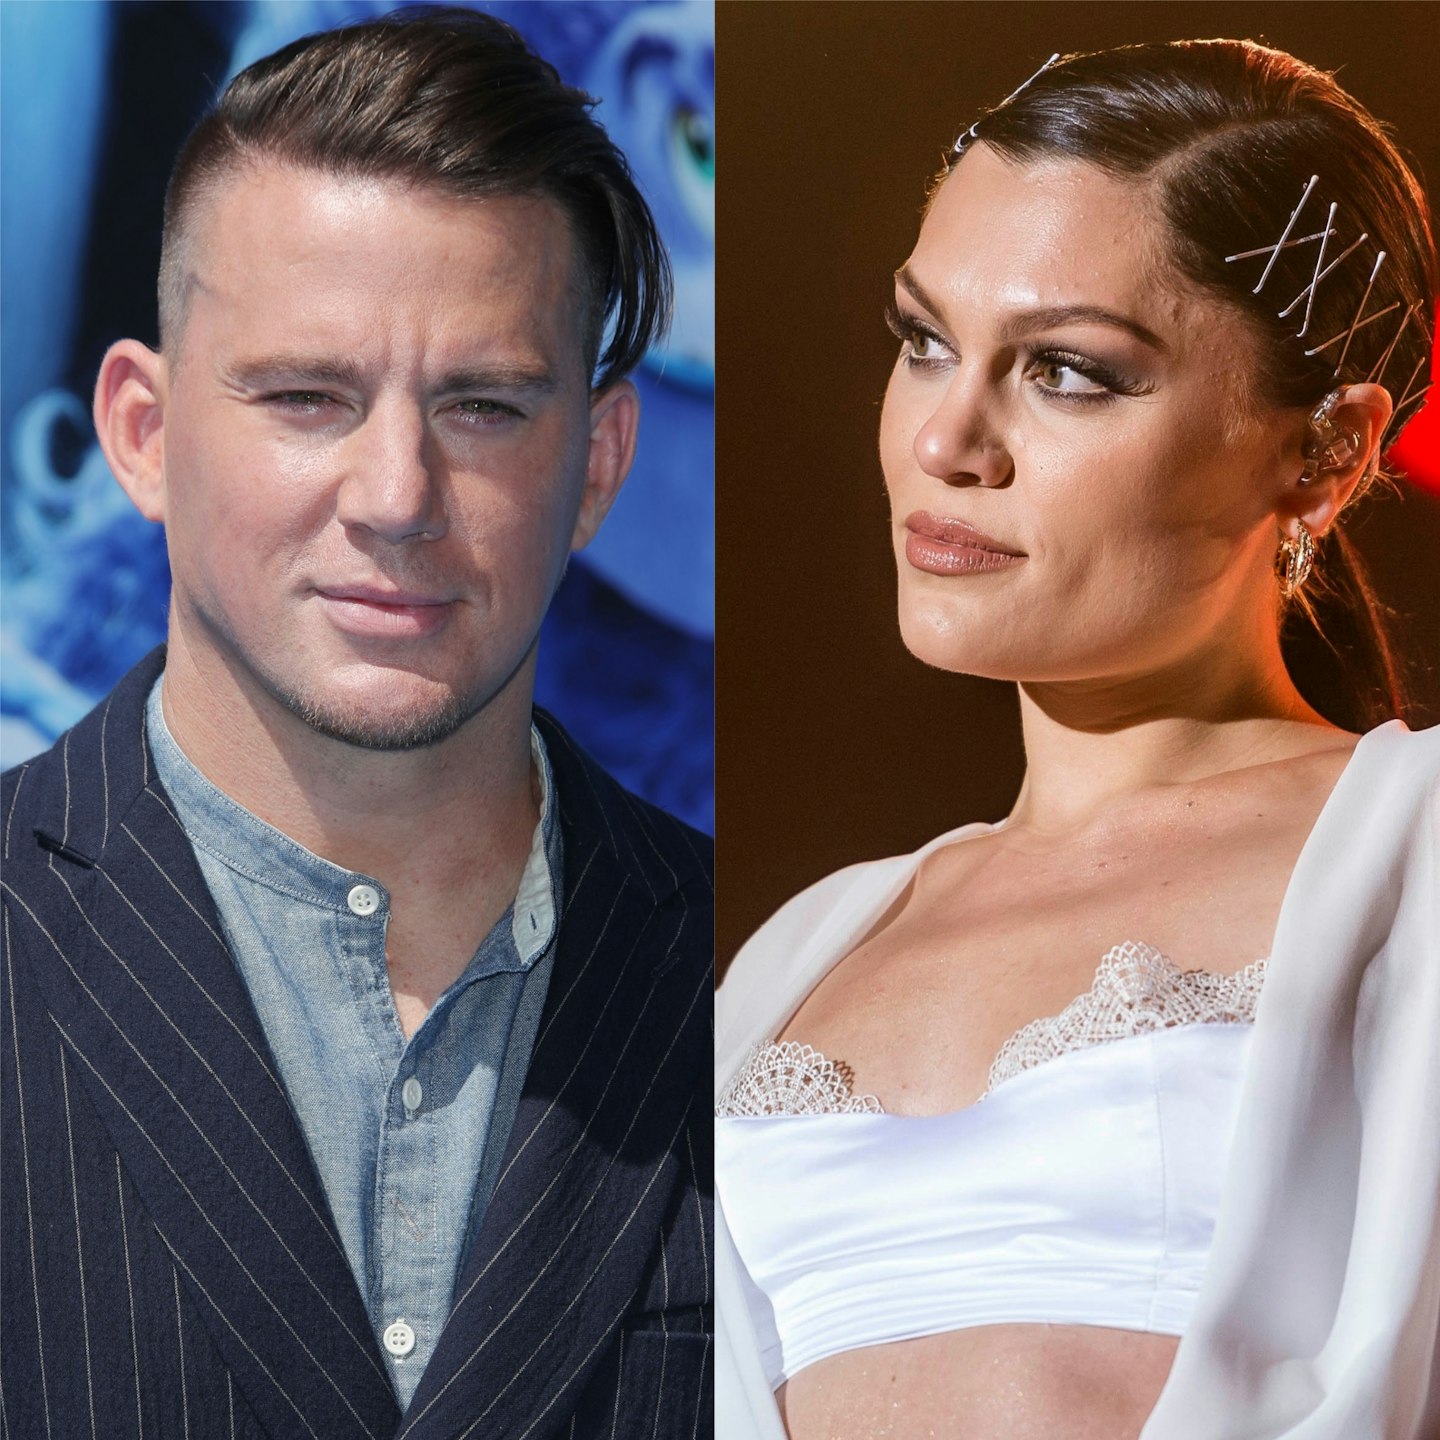 Channing Tatum and Jessie J, who are rumoured to be dating